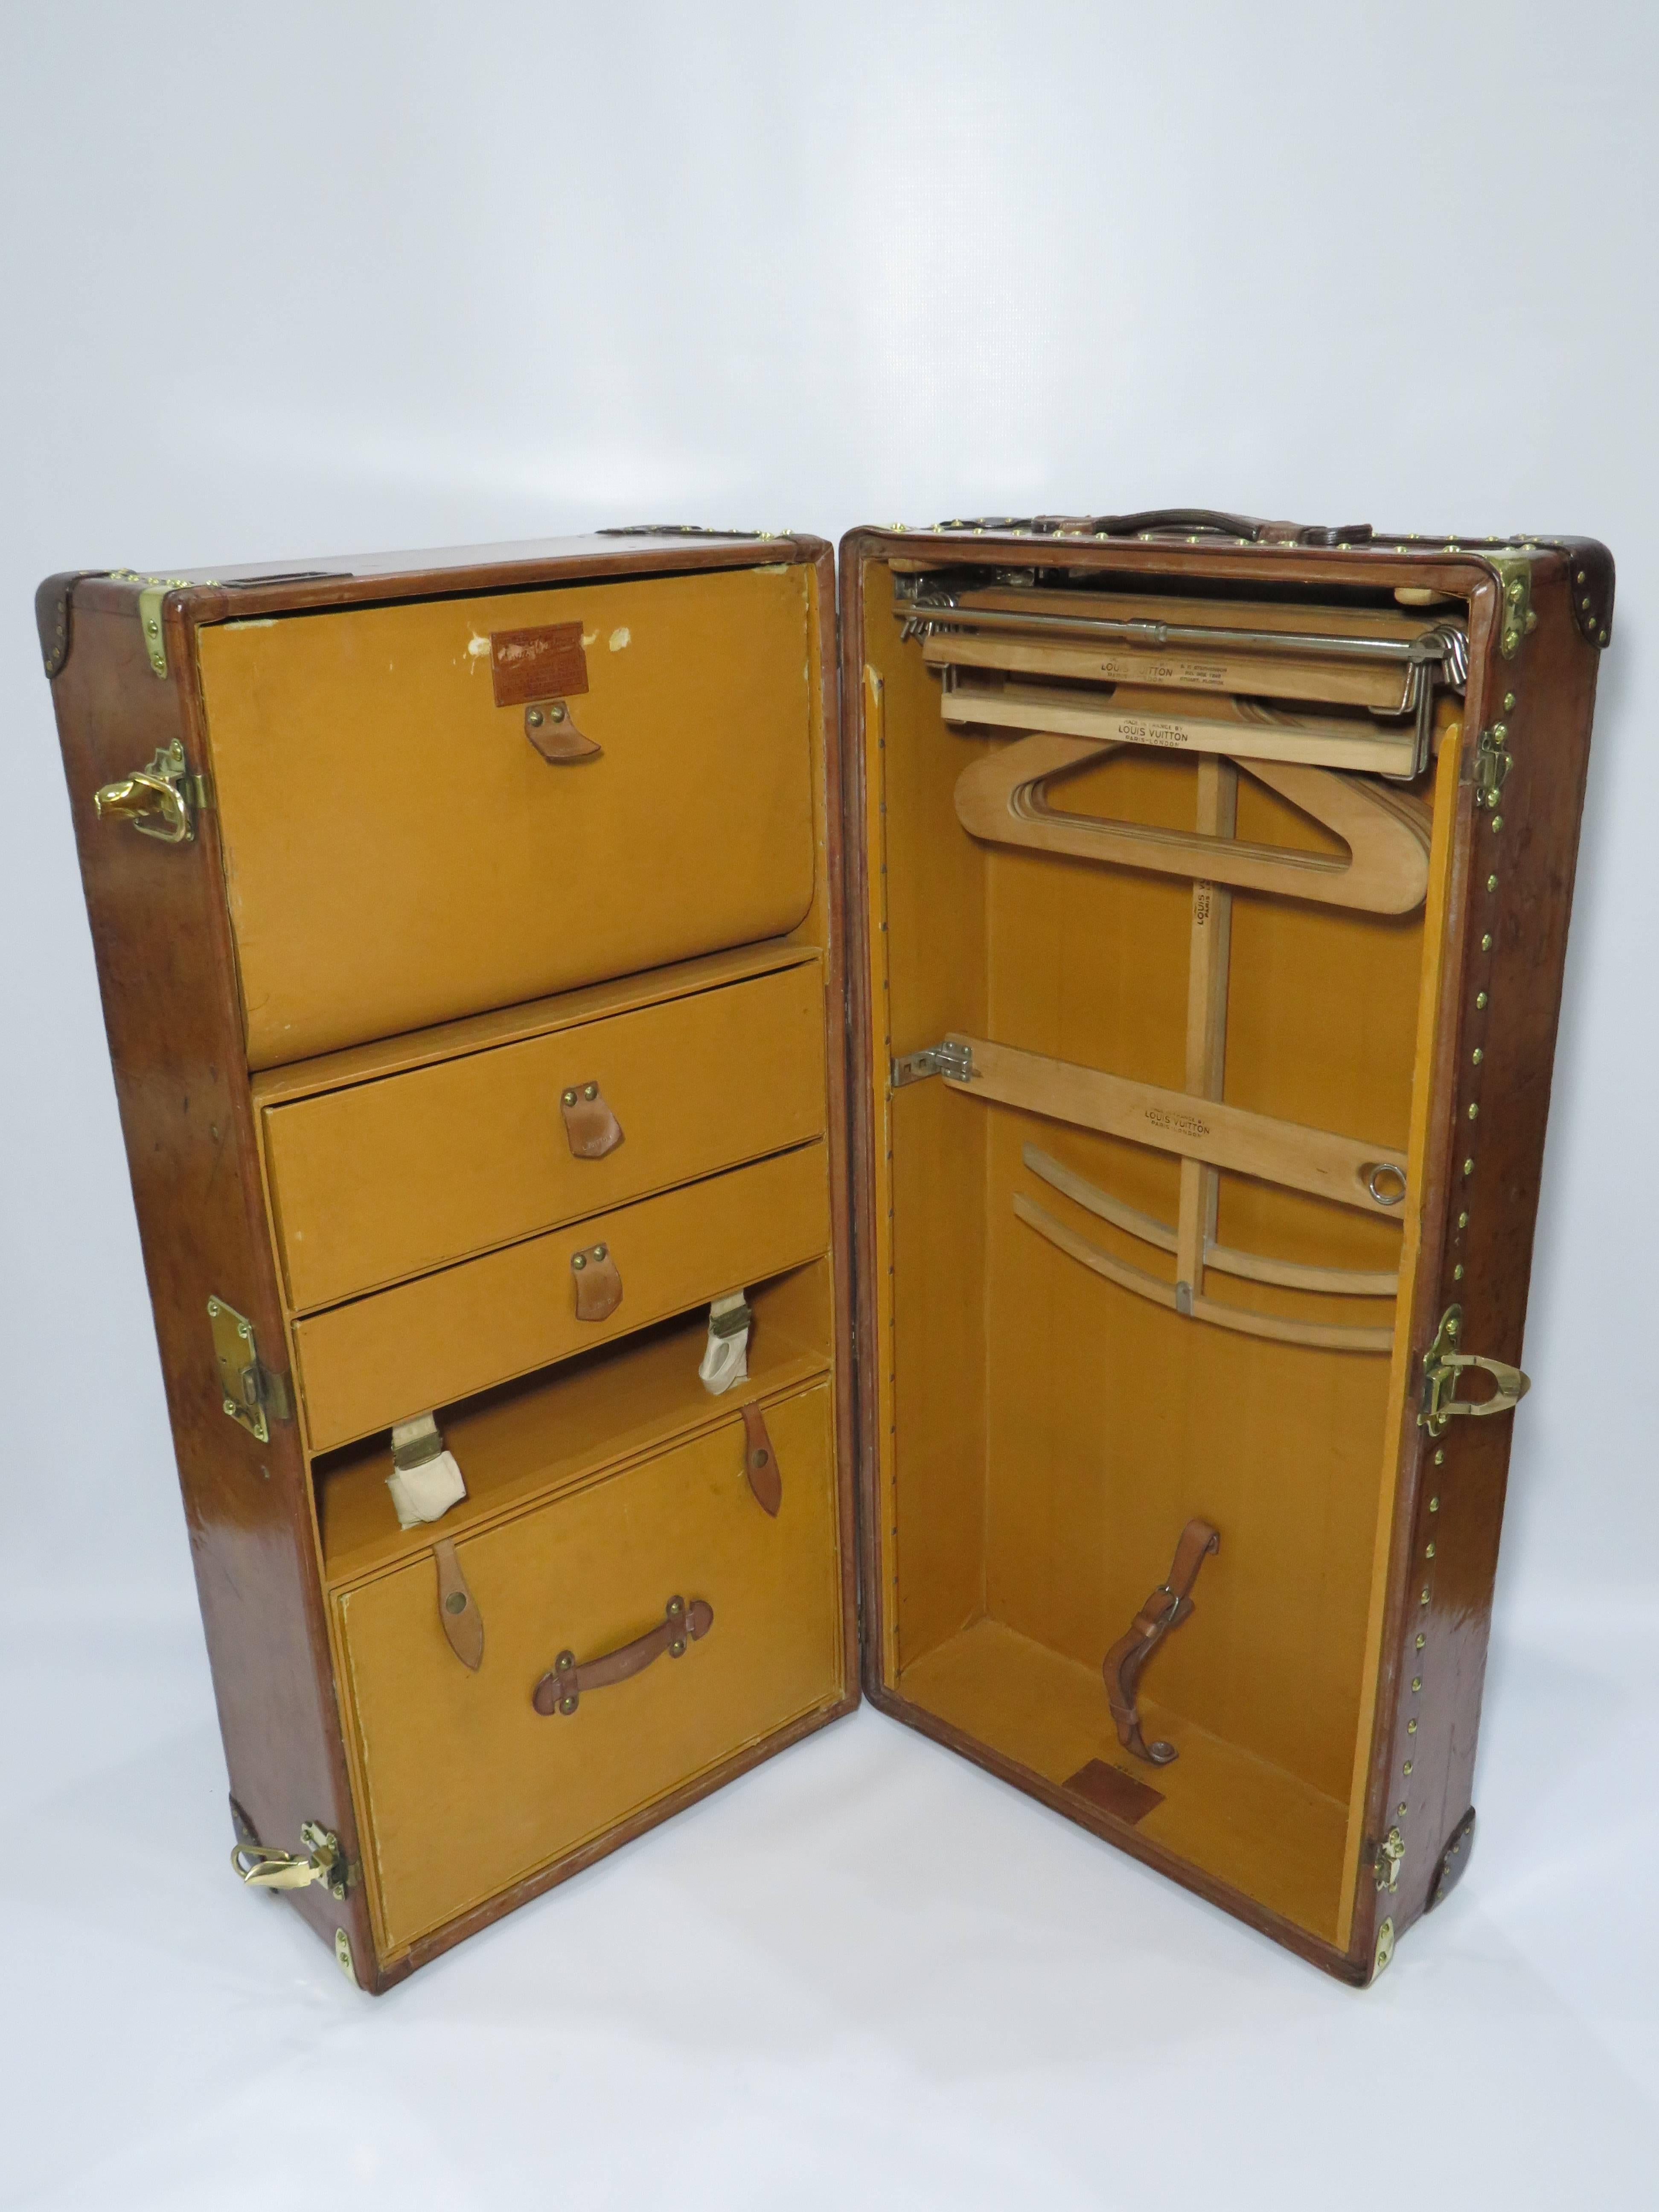 Louis Vuitton calf leather wardrobe trunk in immaculate condition.

Leather has an incredible patina and the polished brass hardware shines making a great contrast. It's rare to find a leather trunk with such nice patina and in great condition